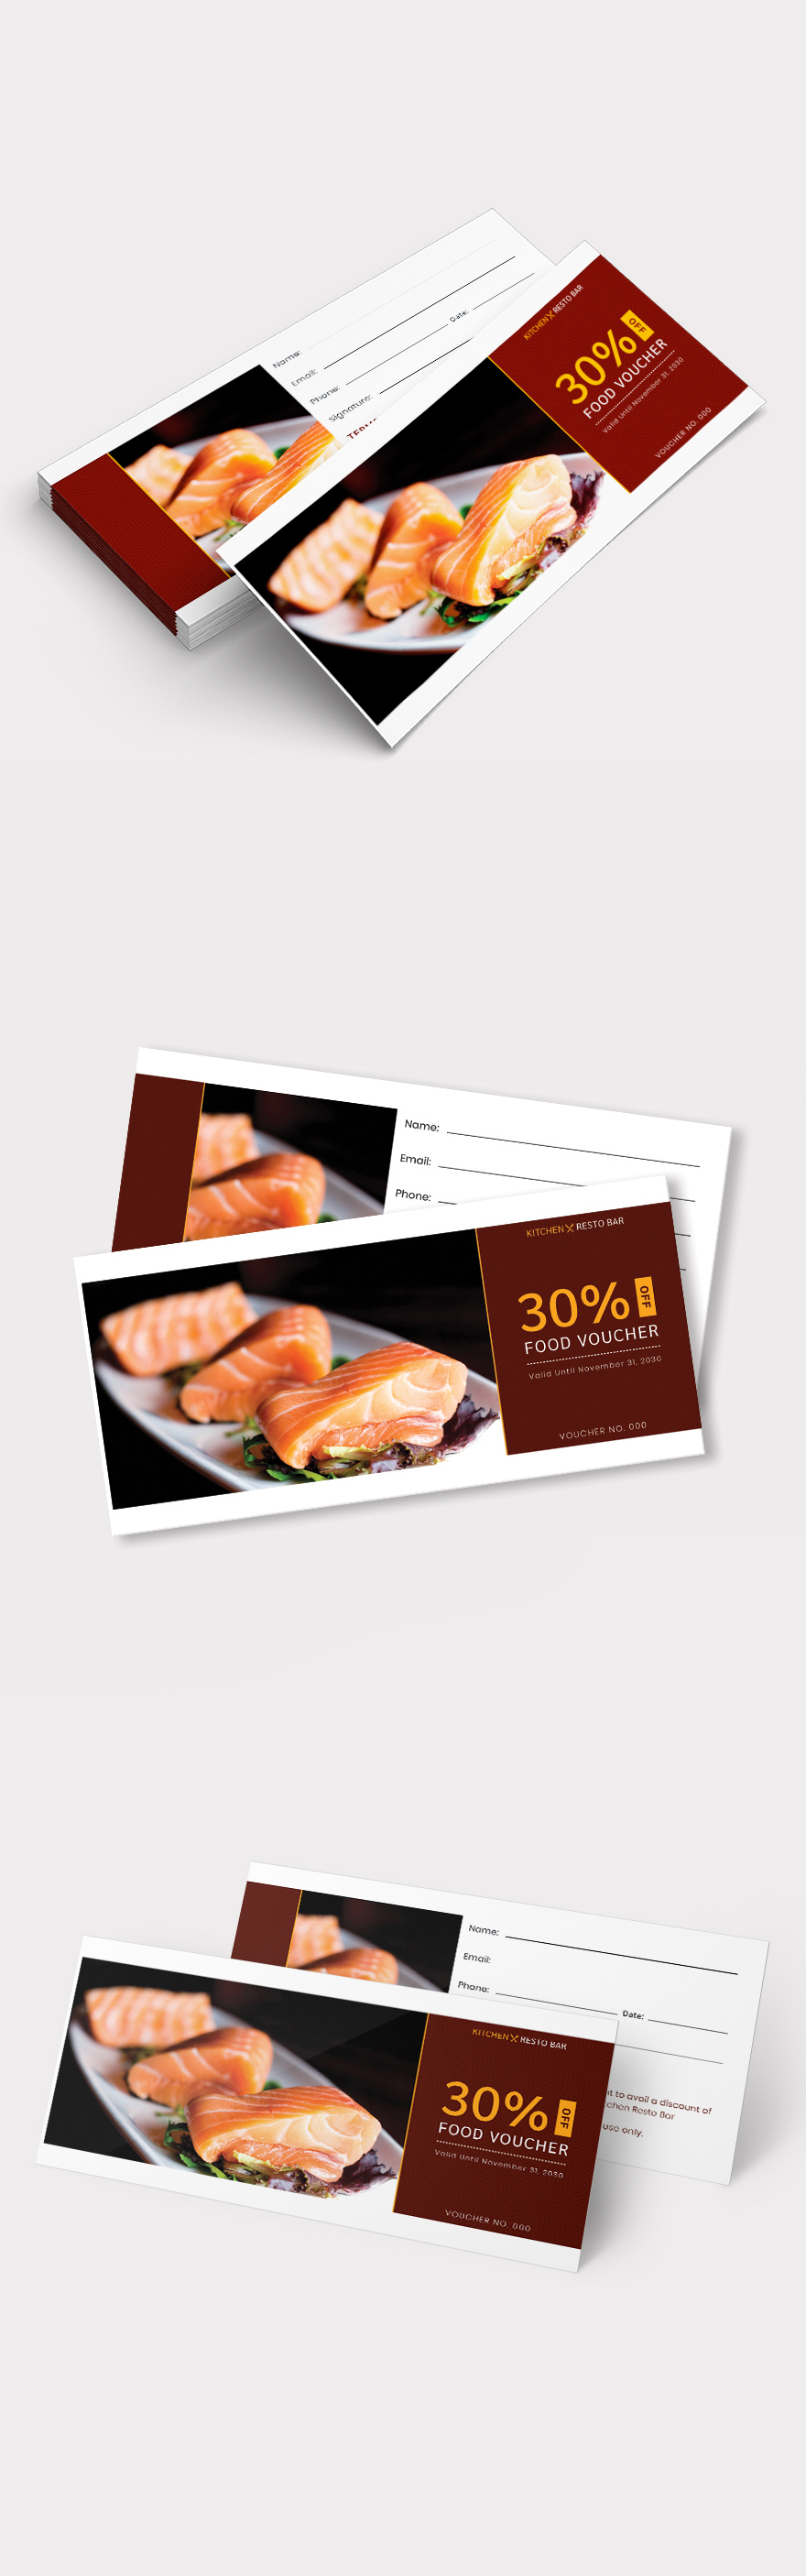 Dinner voucher Template Illustrator Word Apple Pages PSD